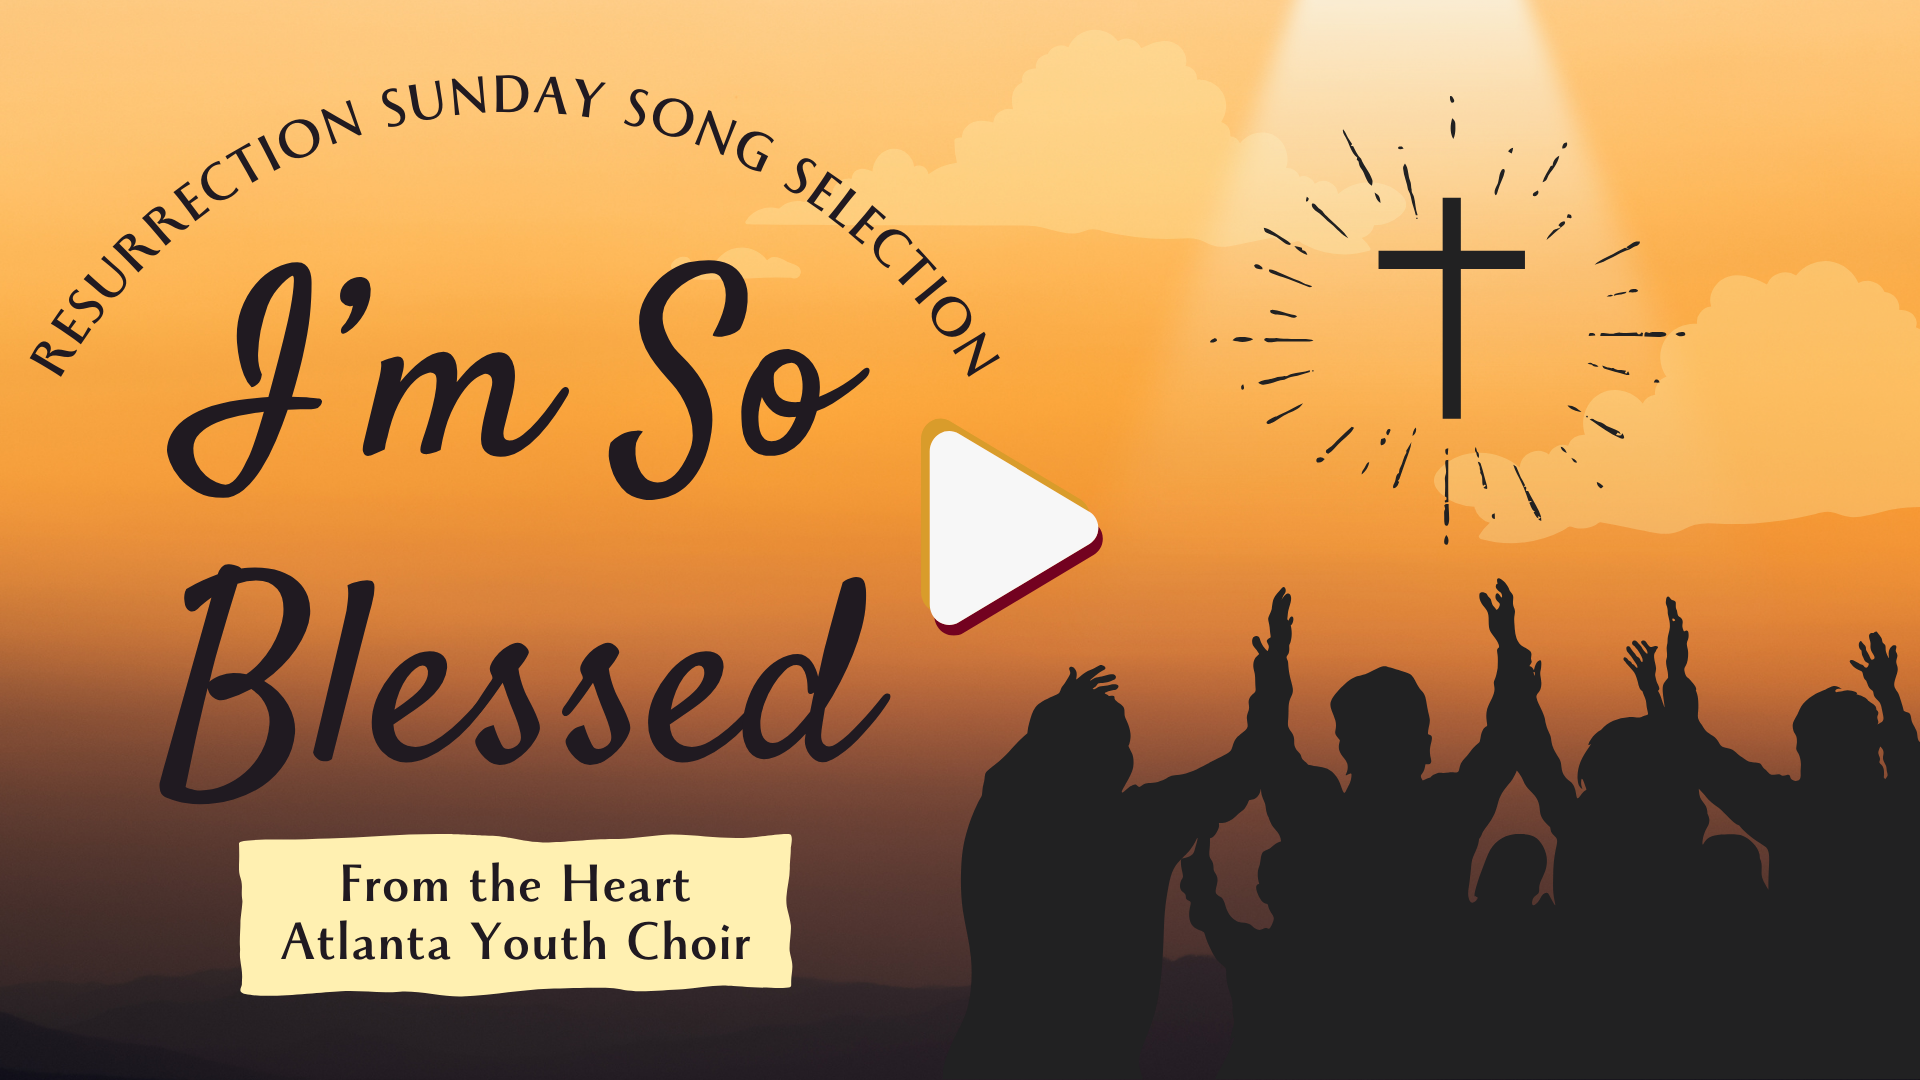 I'm So Blessed - Youth Choir Resurrection Sunday Song Selection at From the Heart Atlanta